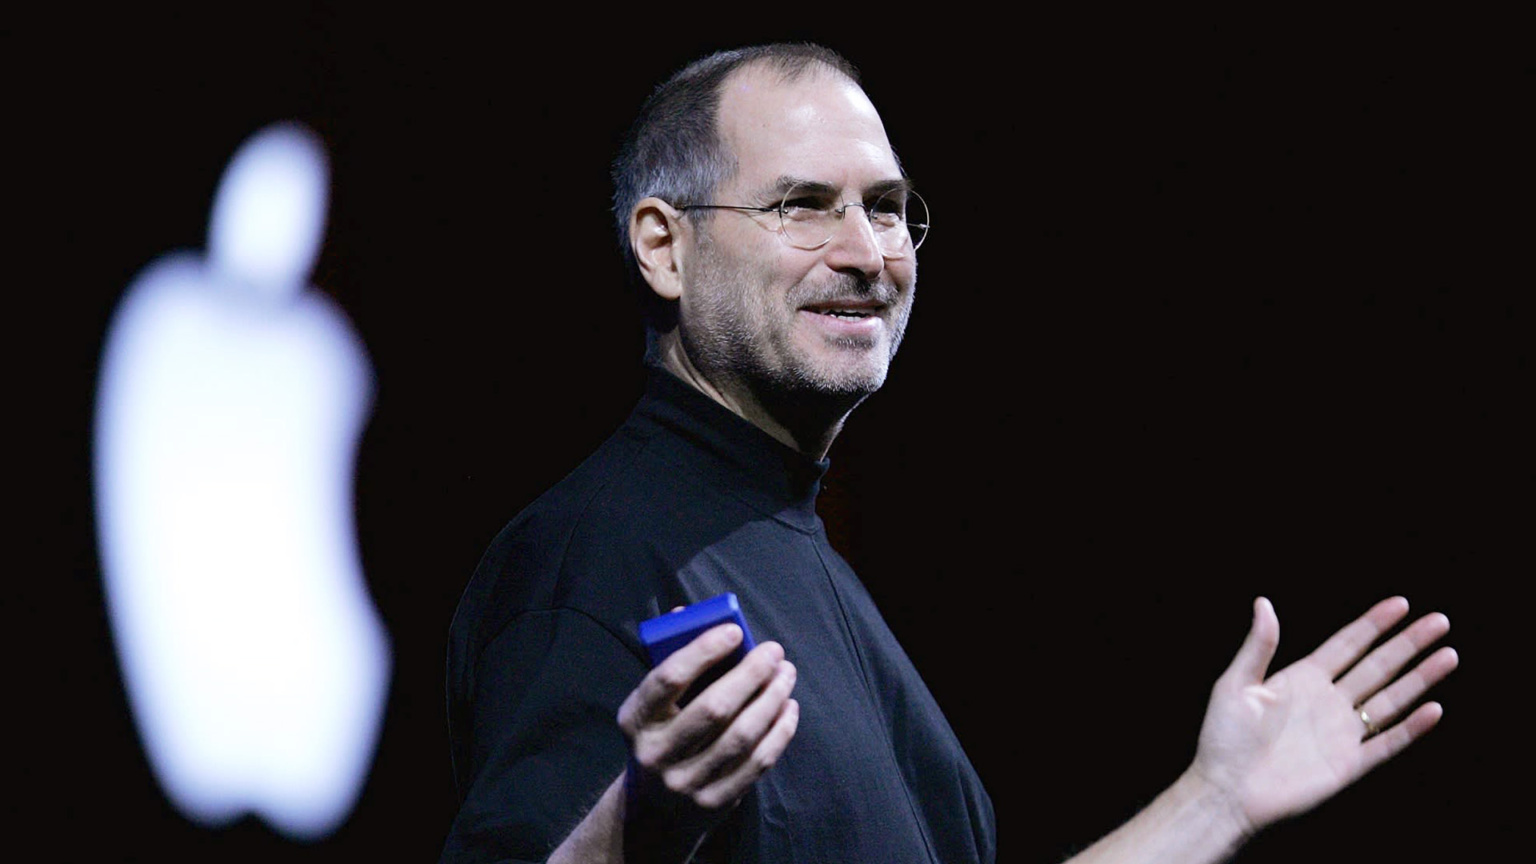 The key to Apple's success: simplicity is in Apple's DNA